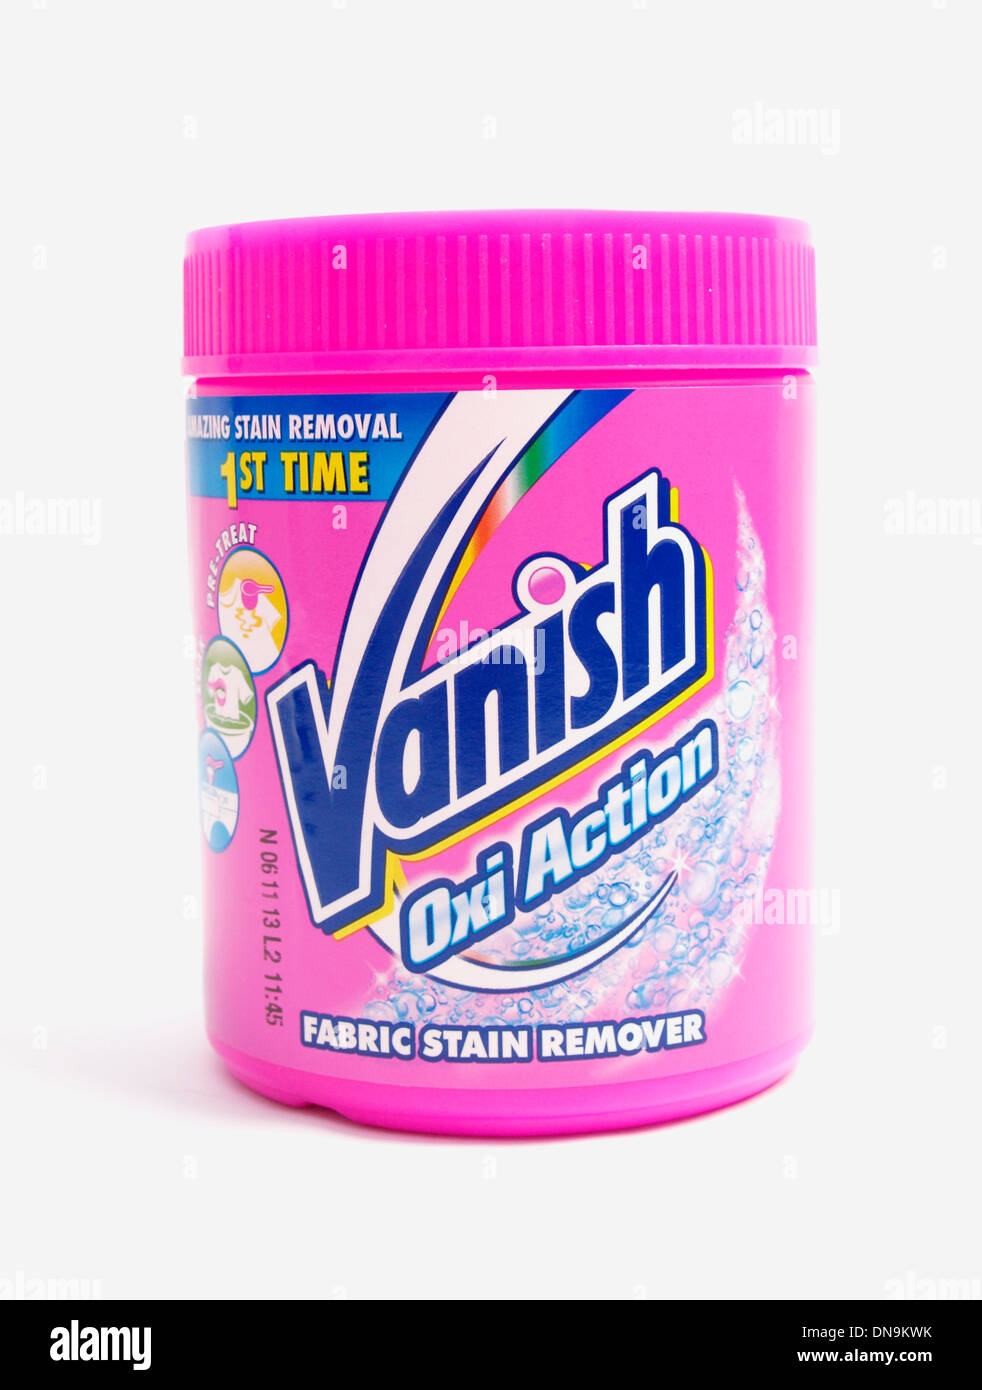 https://c8.alamy.com/comp/DN9KWK/vanish-oxi-action-fabric-stain-remover-on-white-background-DN9KWK.jpg